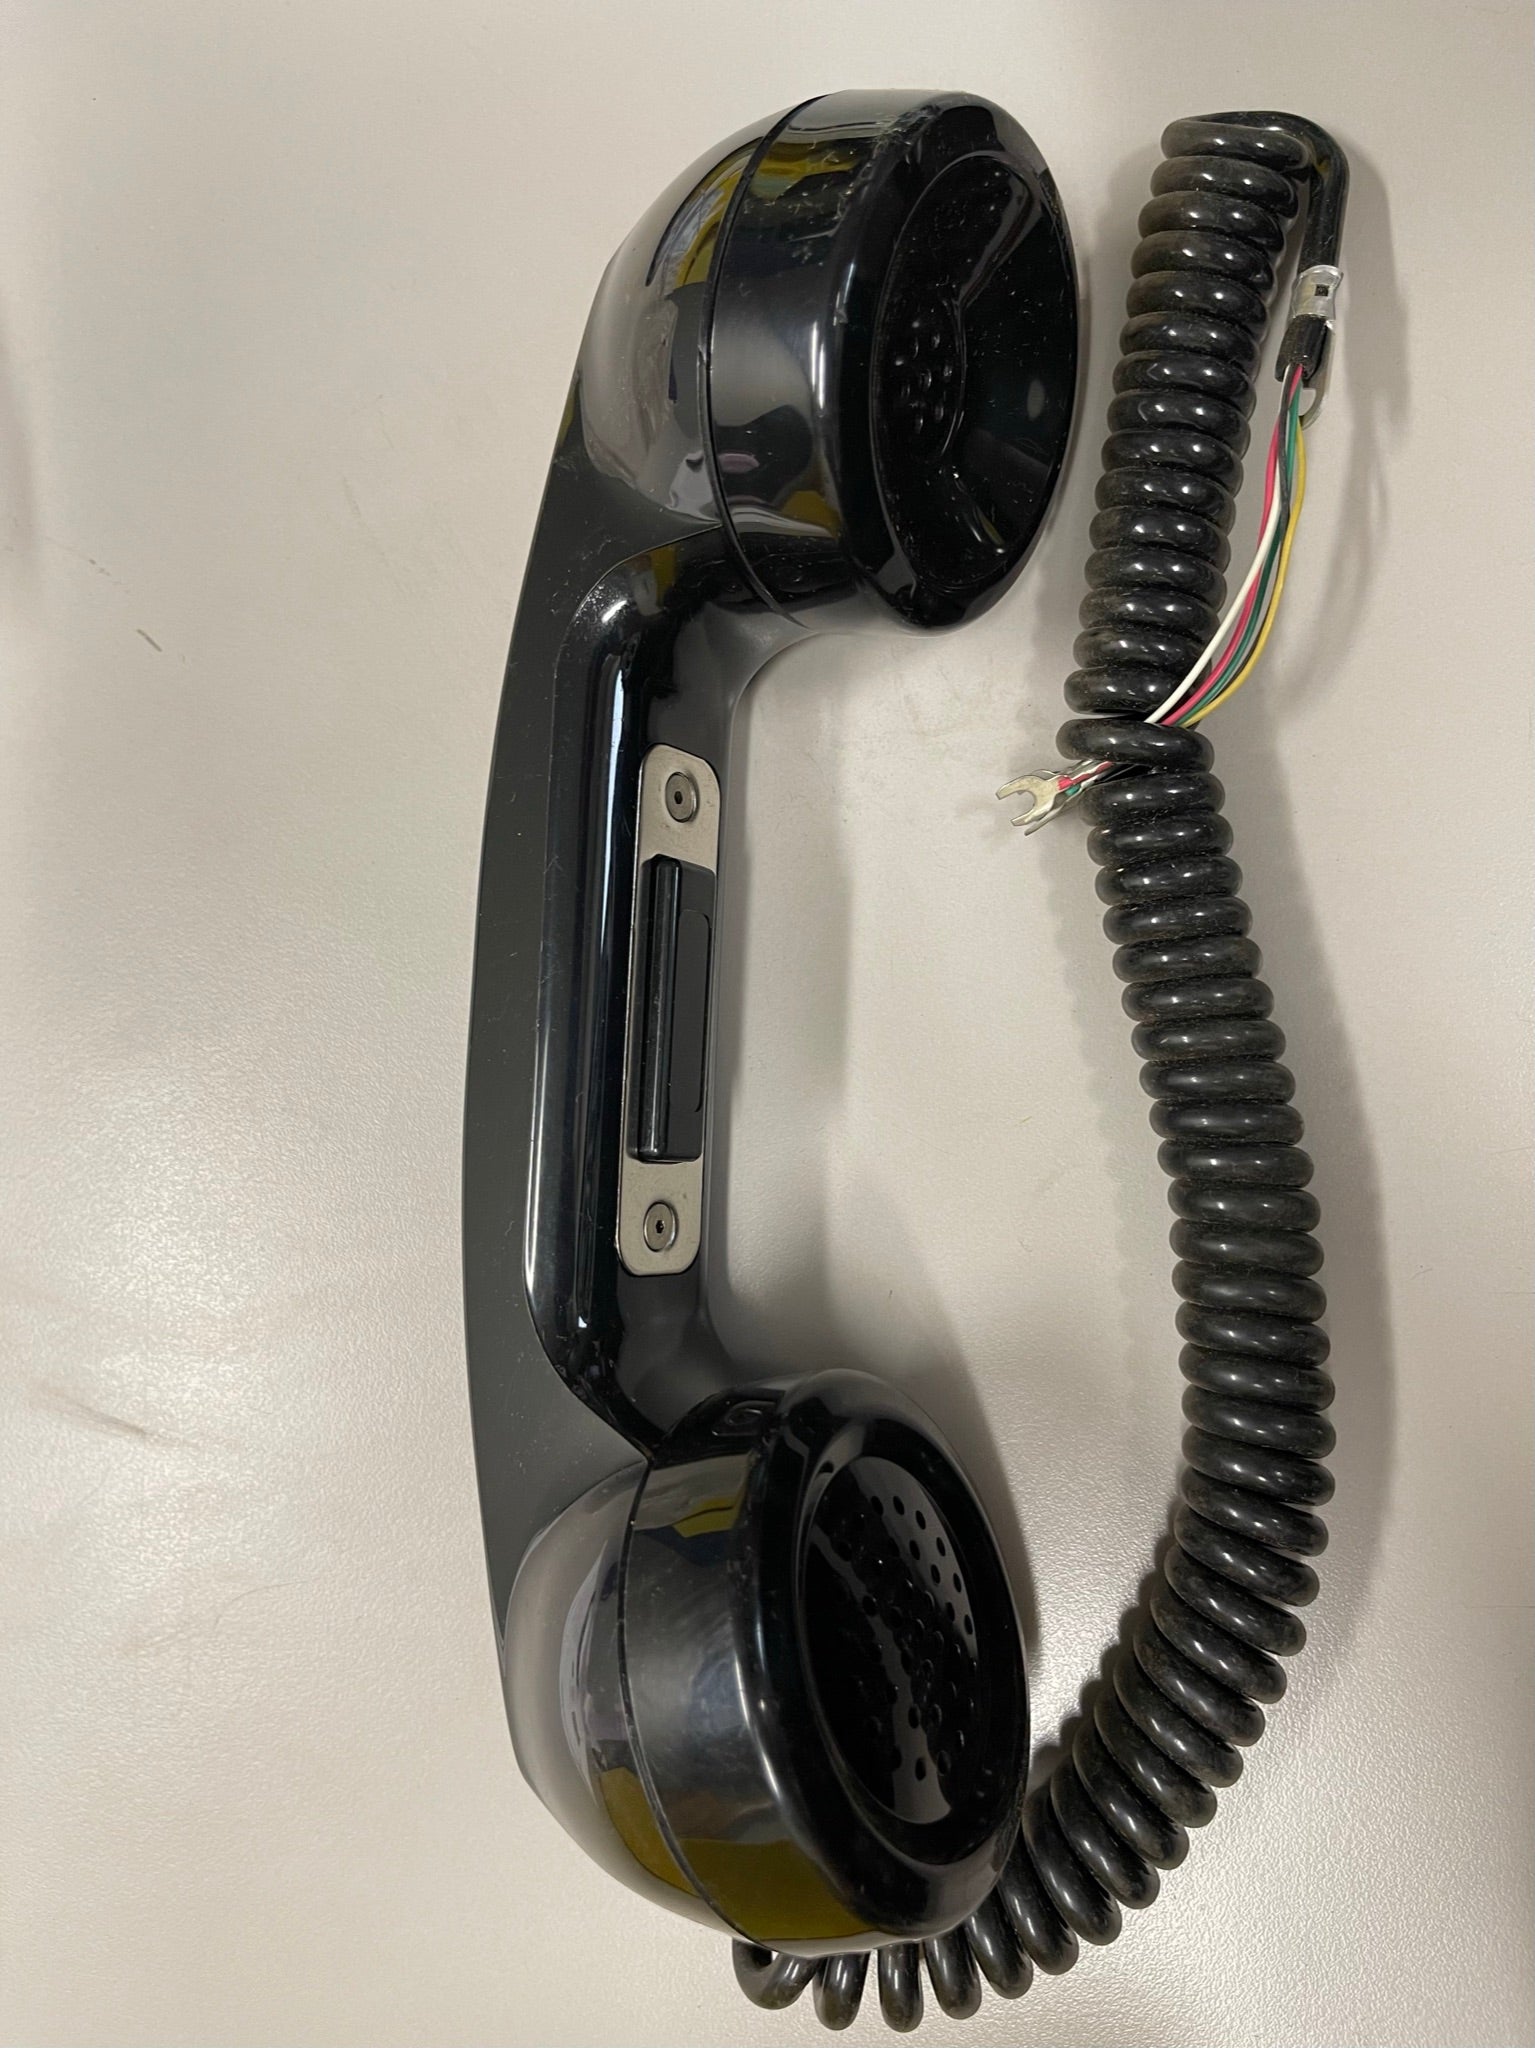 3W Electronics Inc HANDSET, ITT-KELLOGG W/PUSH-BUTTON AND 5 COND COILED CORD